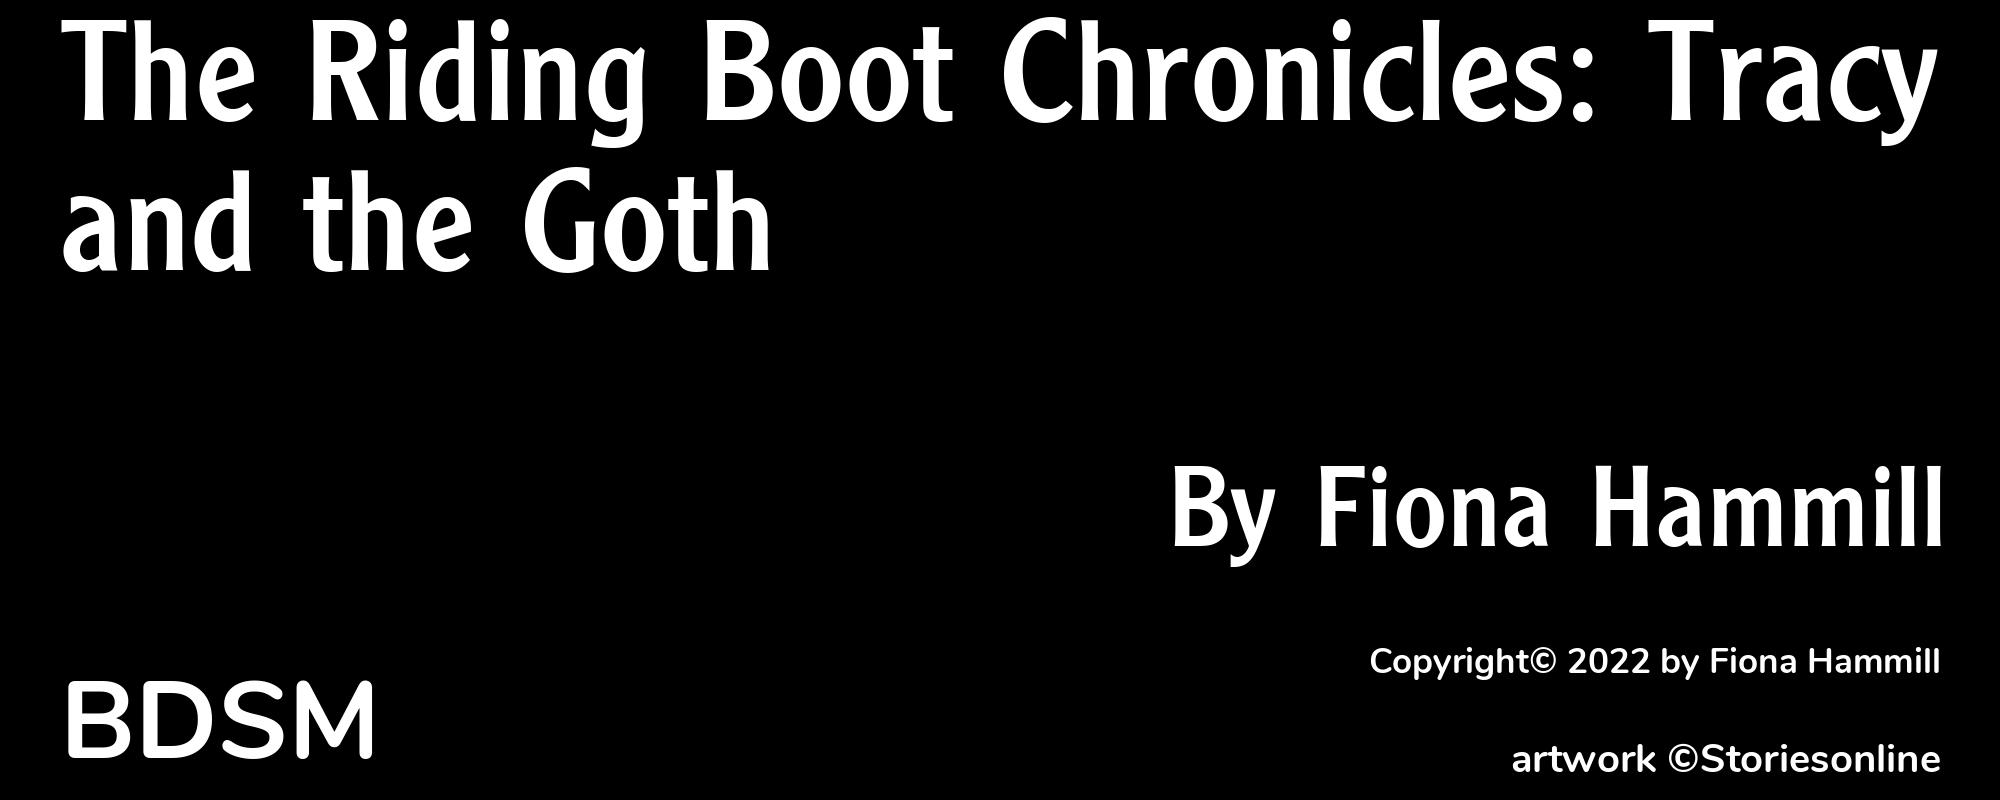 The Riding Boot Chronicles: Tracy and the Goth - Cover